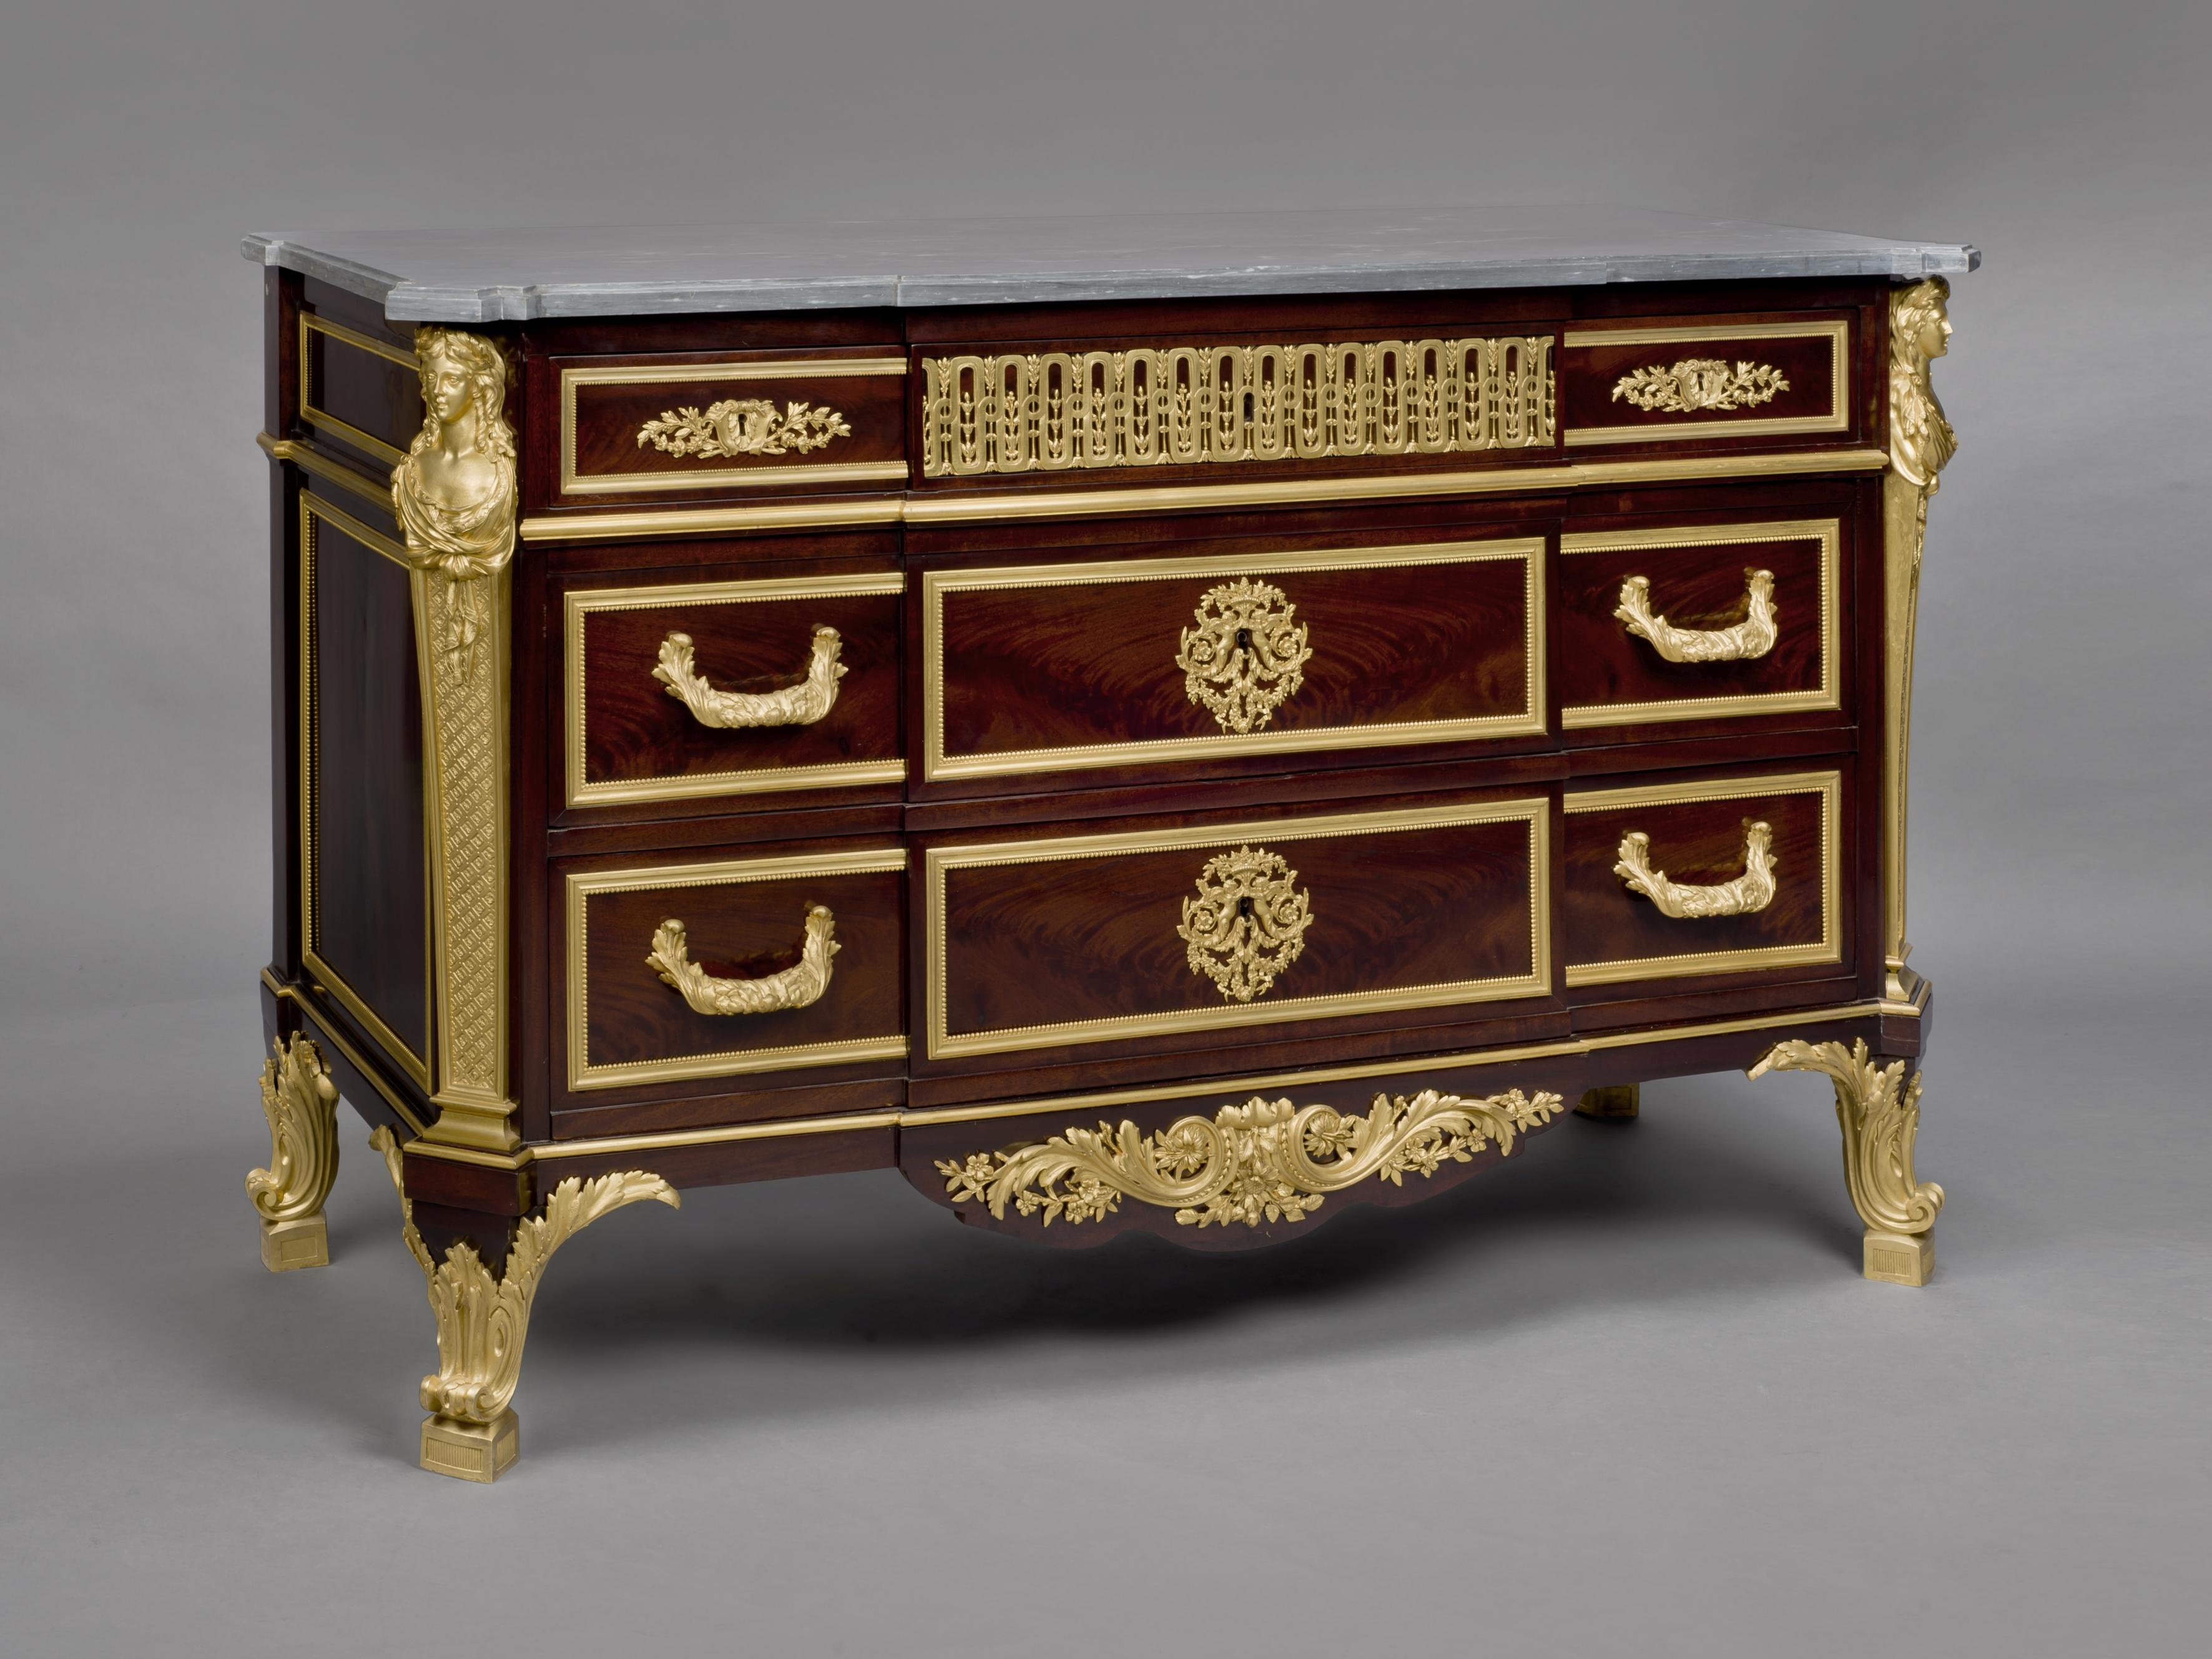 A fine Louis XVI style gilt bronze-mounted mahogany commode, with a blue turquin marble top after the model by Jean-Henri Riesener.

French, circa 1880.

The gilt bronze mounts stamped 'T'. The carcass bearing a faux stamp for 'RIESENER JME